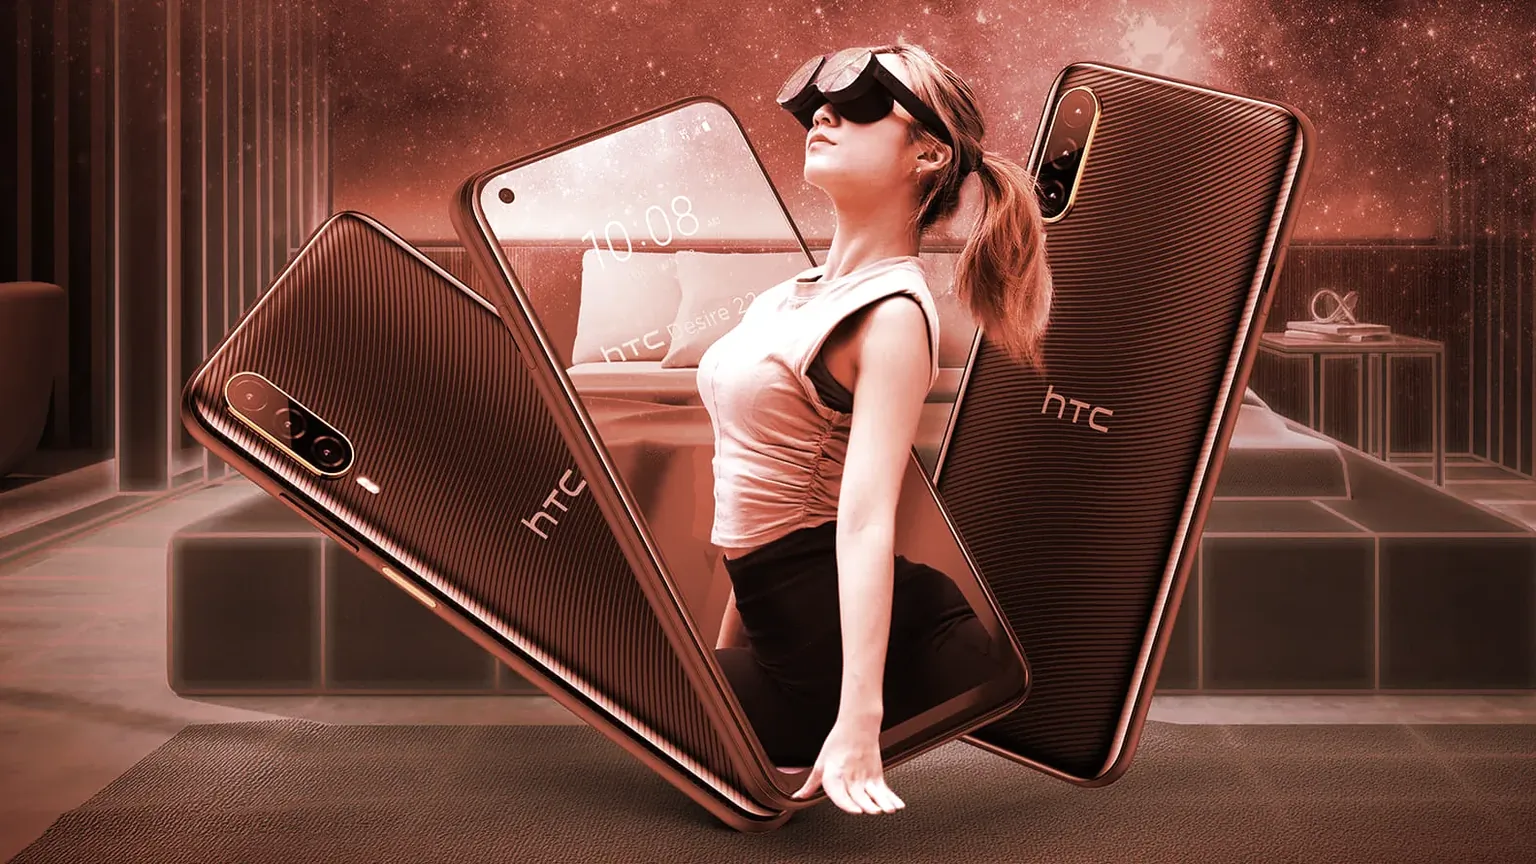 The HTC Desire 22 Pro is designed for metaverse applications. Image: HTC